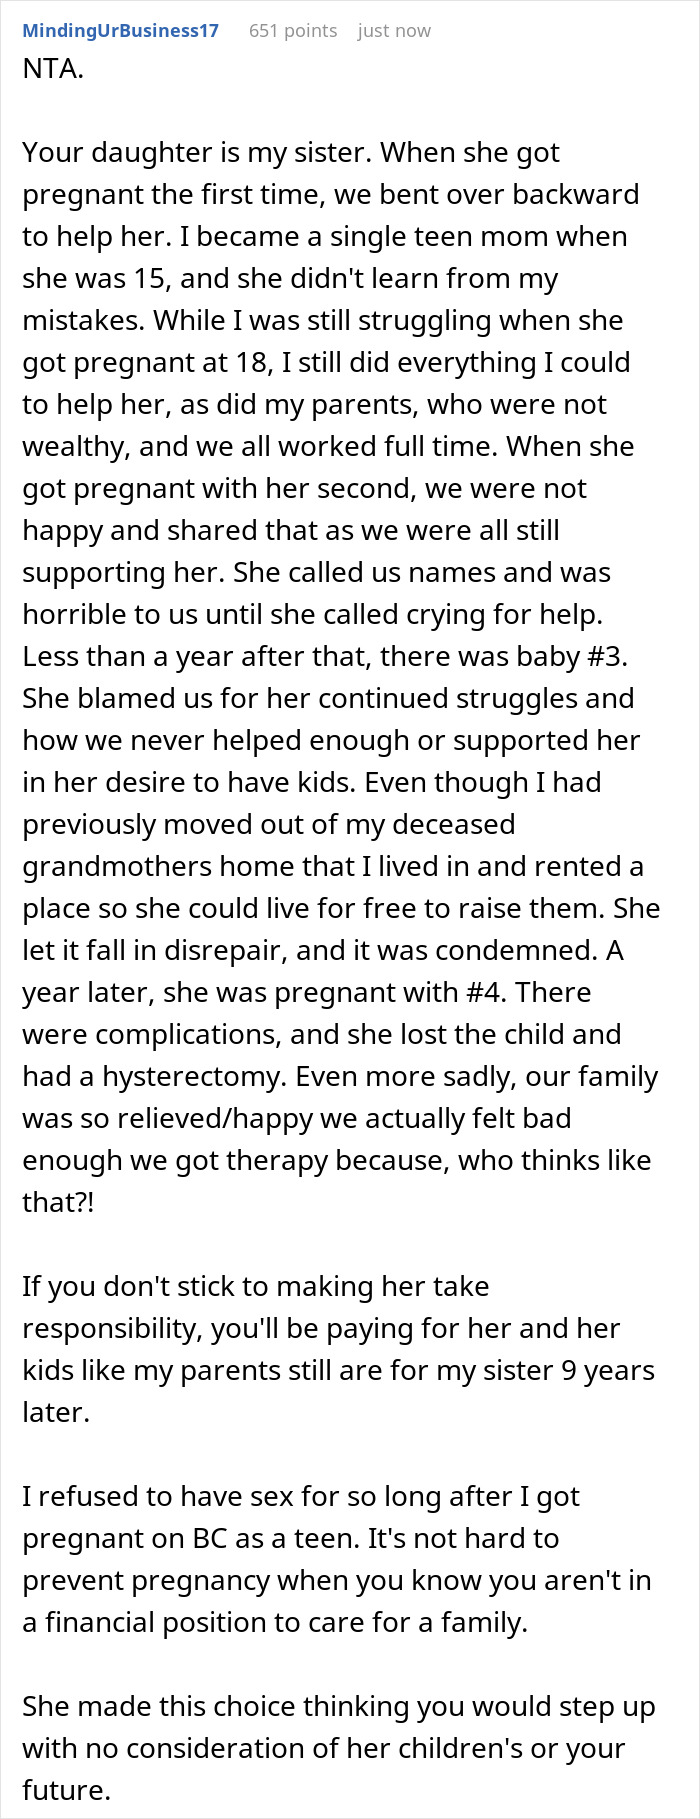 Woman Gets Pregnant After Having Her Parents Raise Her First Baby, Is Upset They're Not Happy